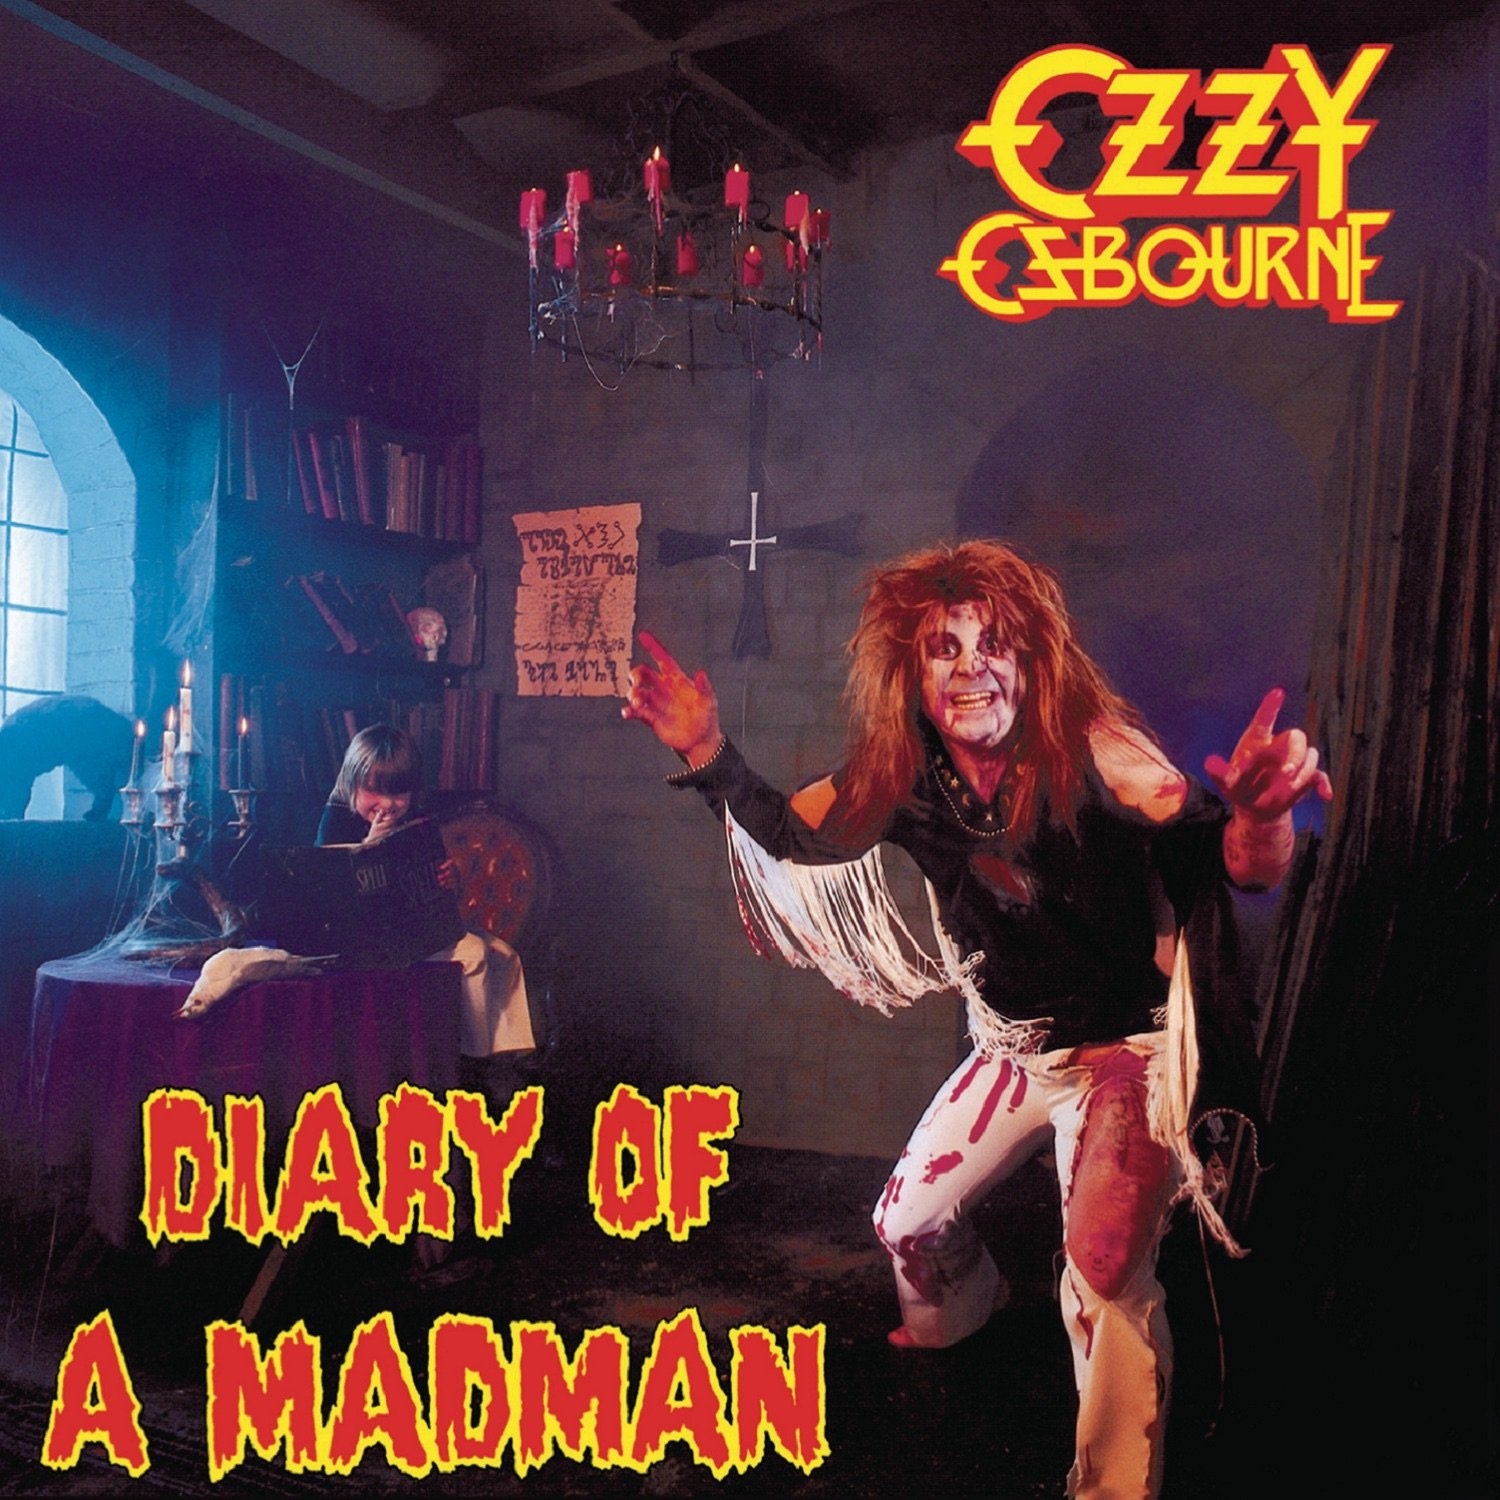 Металл Sony Osbourne, Ozzy - Diary of a Madman (40th anniversary) (Limited Marbled Vinyl)